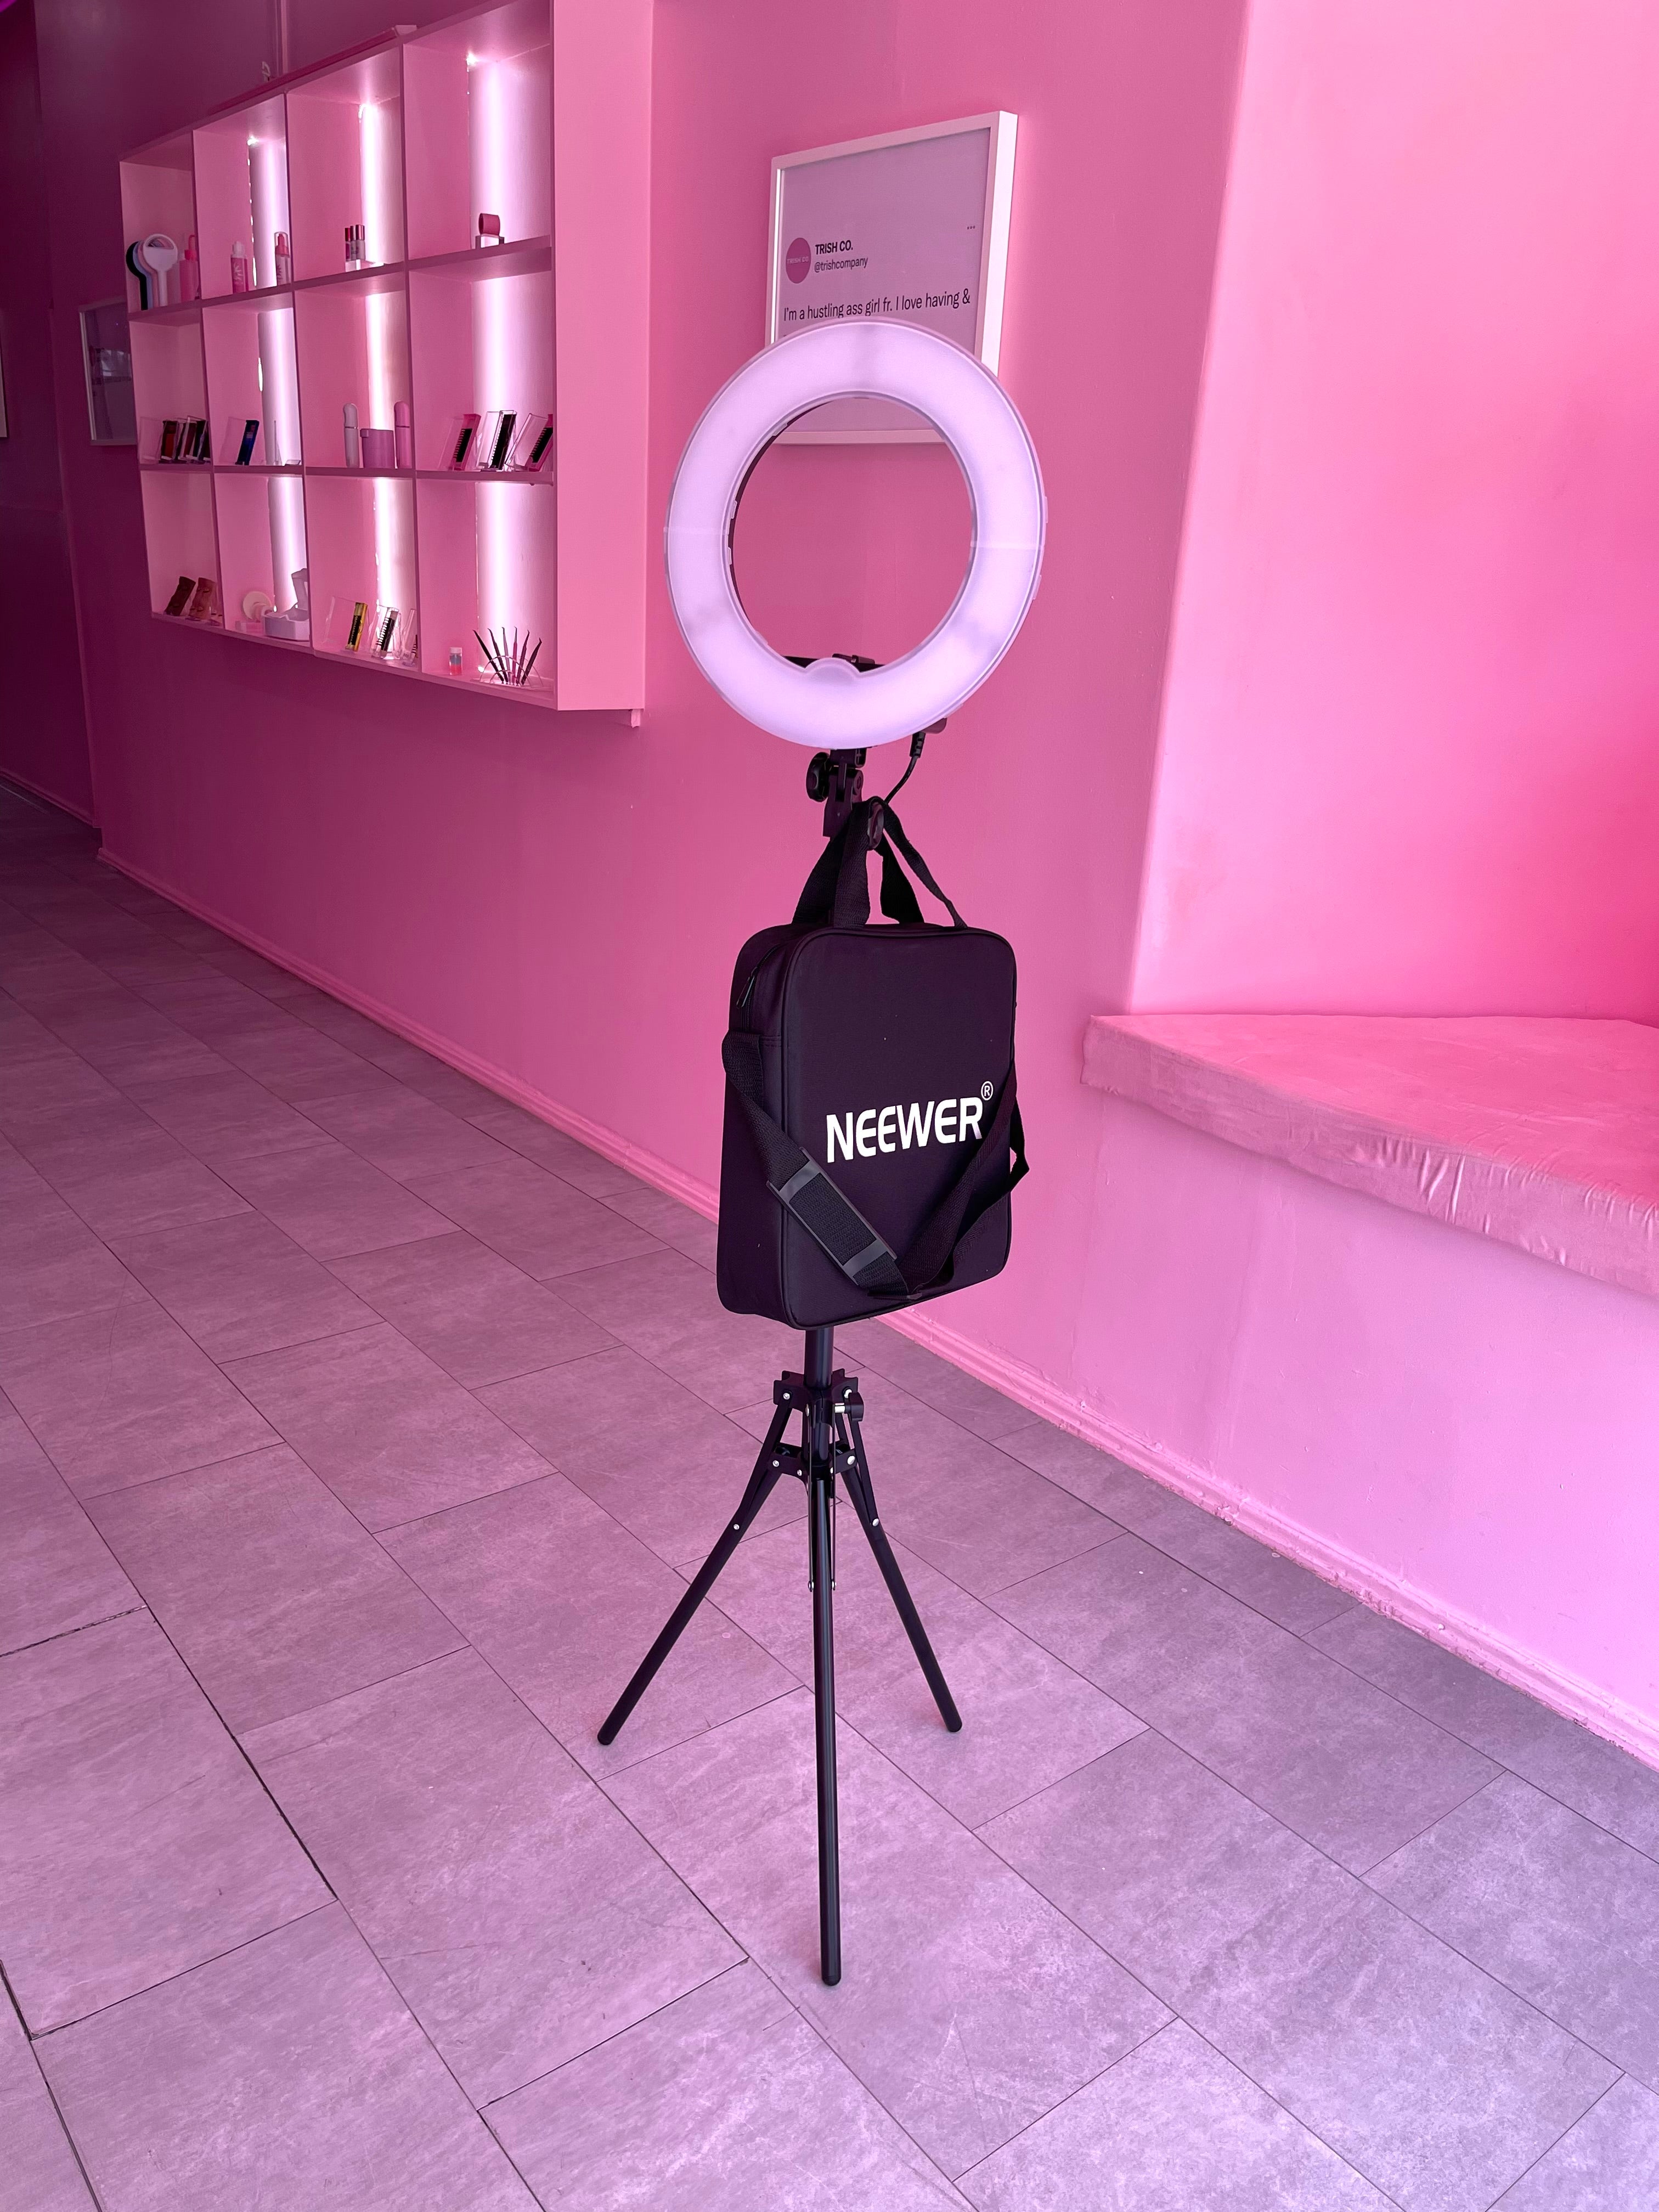 Neewer 14in ring light IN STORE ONLY – Trish Cosmetics